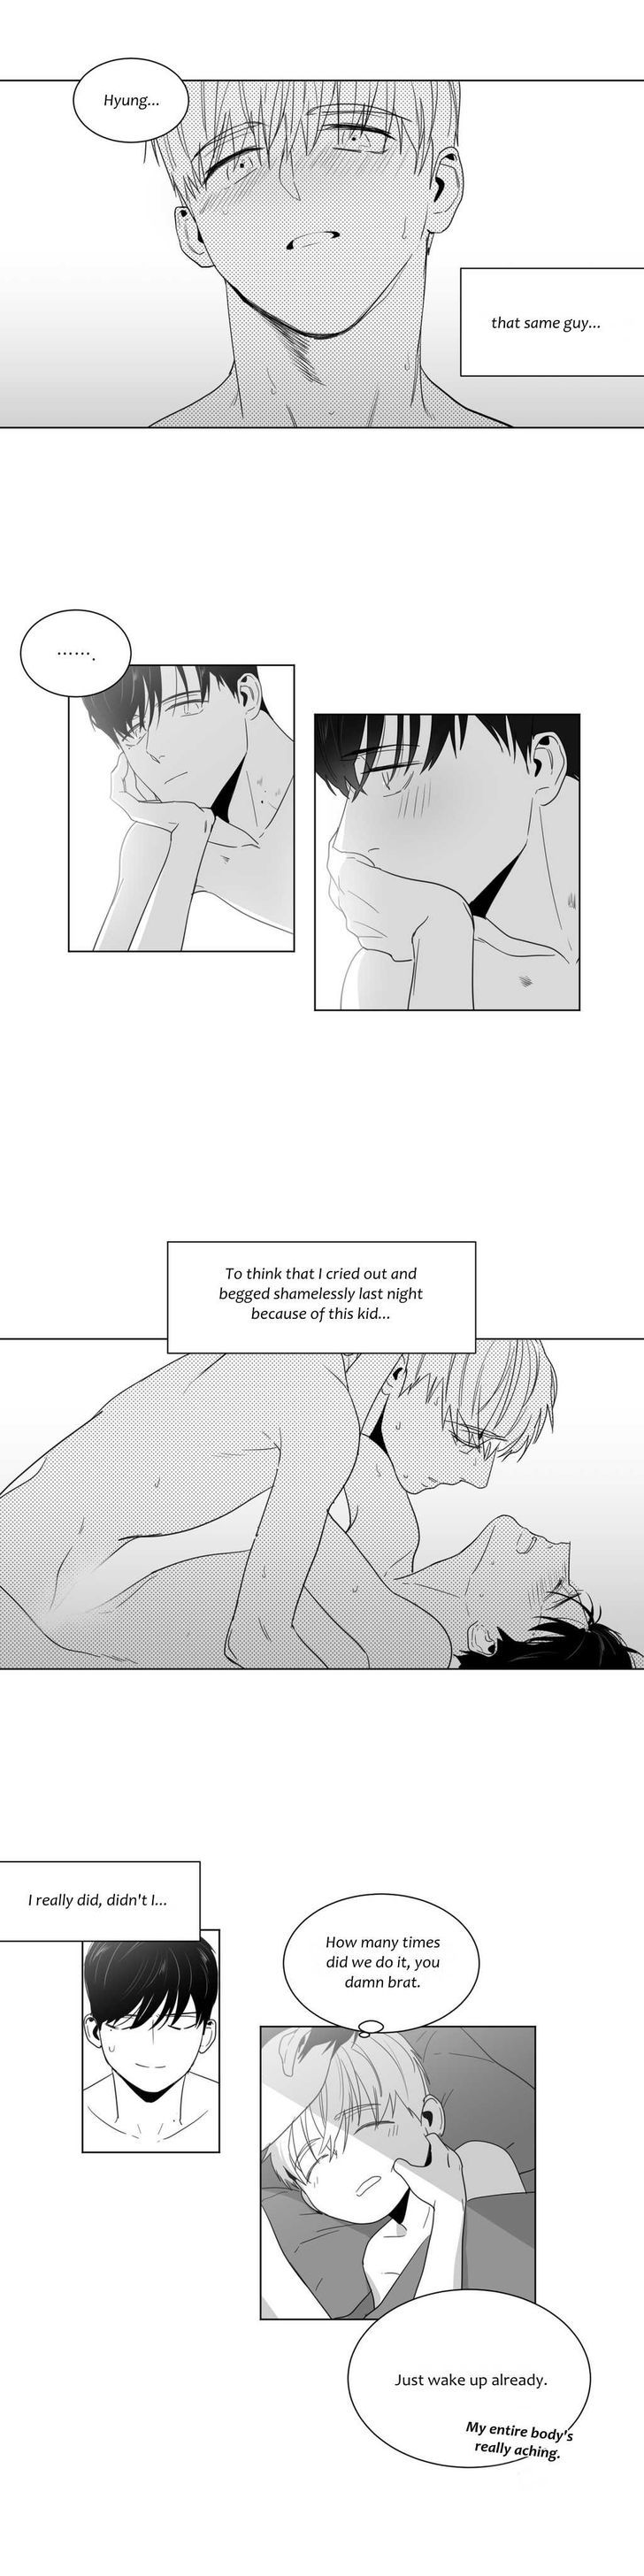 Lover Boy (Lezhin) Chapter 017 page 4